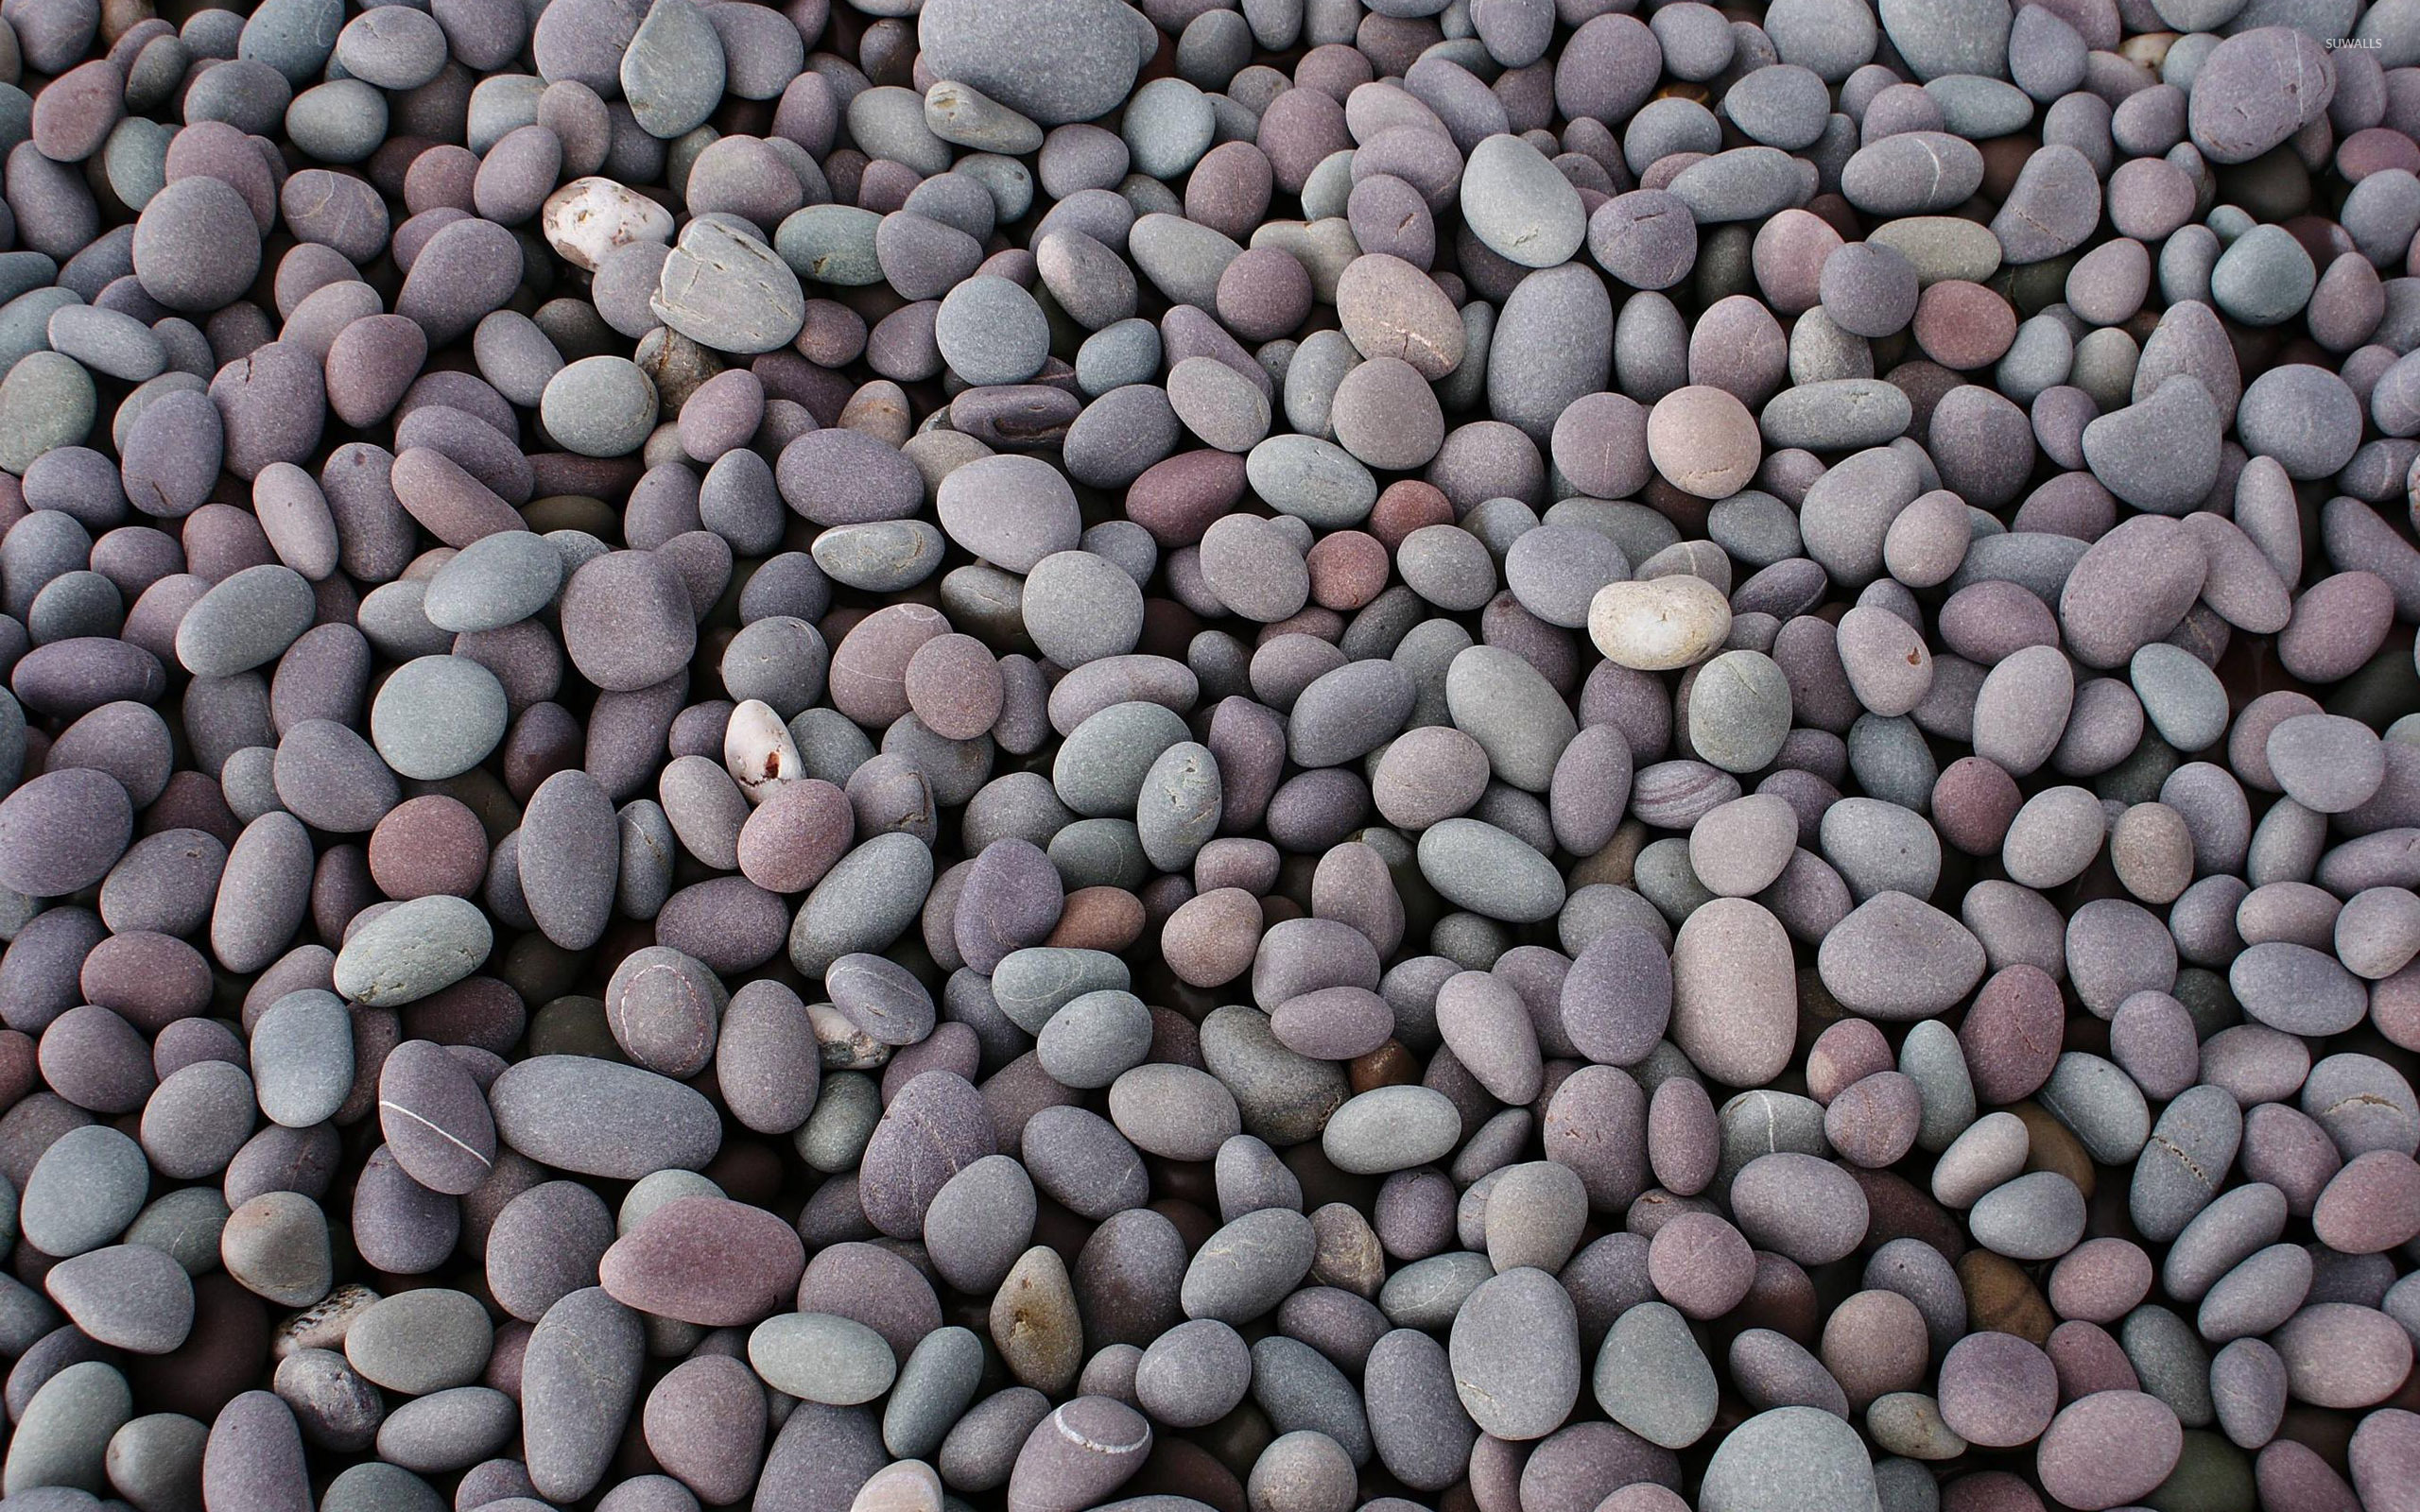 Smooth Pebbles Wallpaper Photography Wallpapers 29087 HD Wallpapers Download Free Map Images Wallpaper [wallpaper684.blogspot.com]